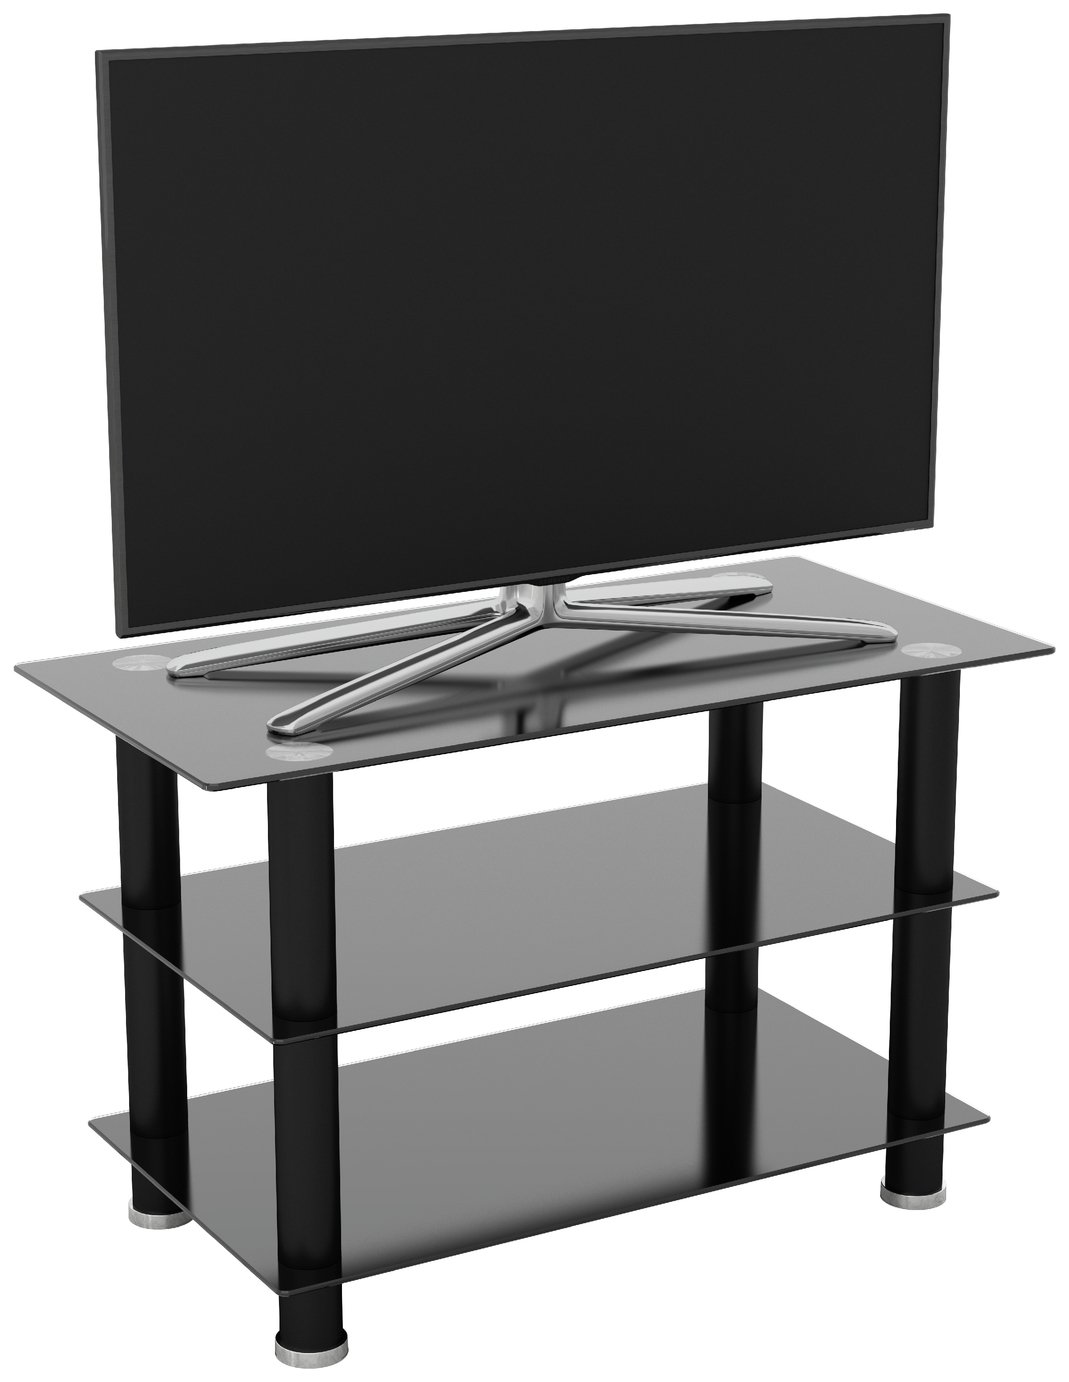 AVF Glass up to 40 Inch TV Stand Review